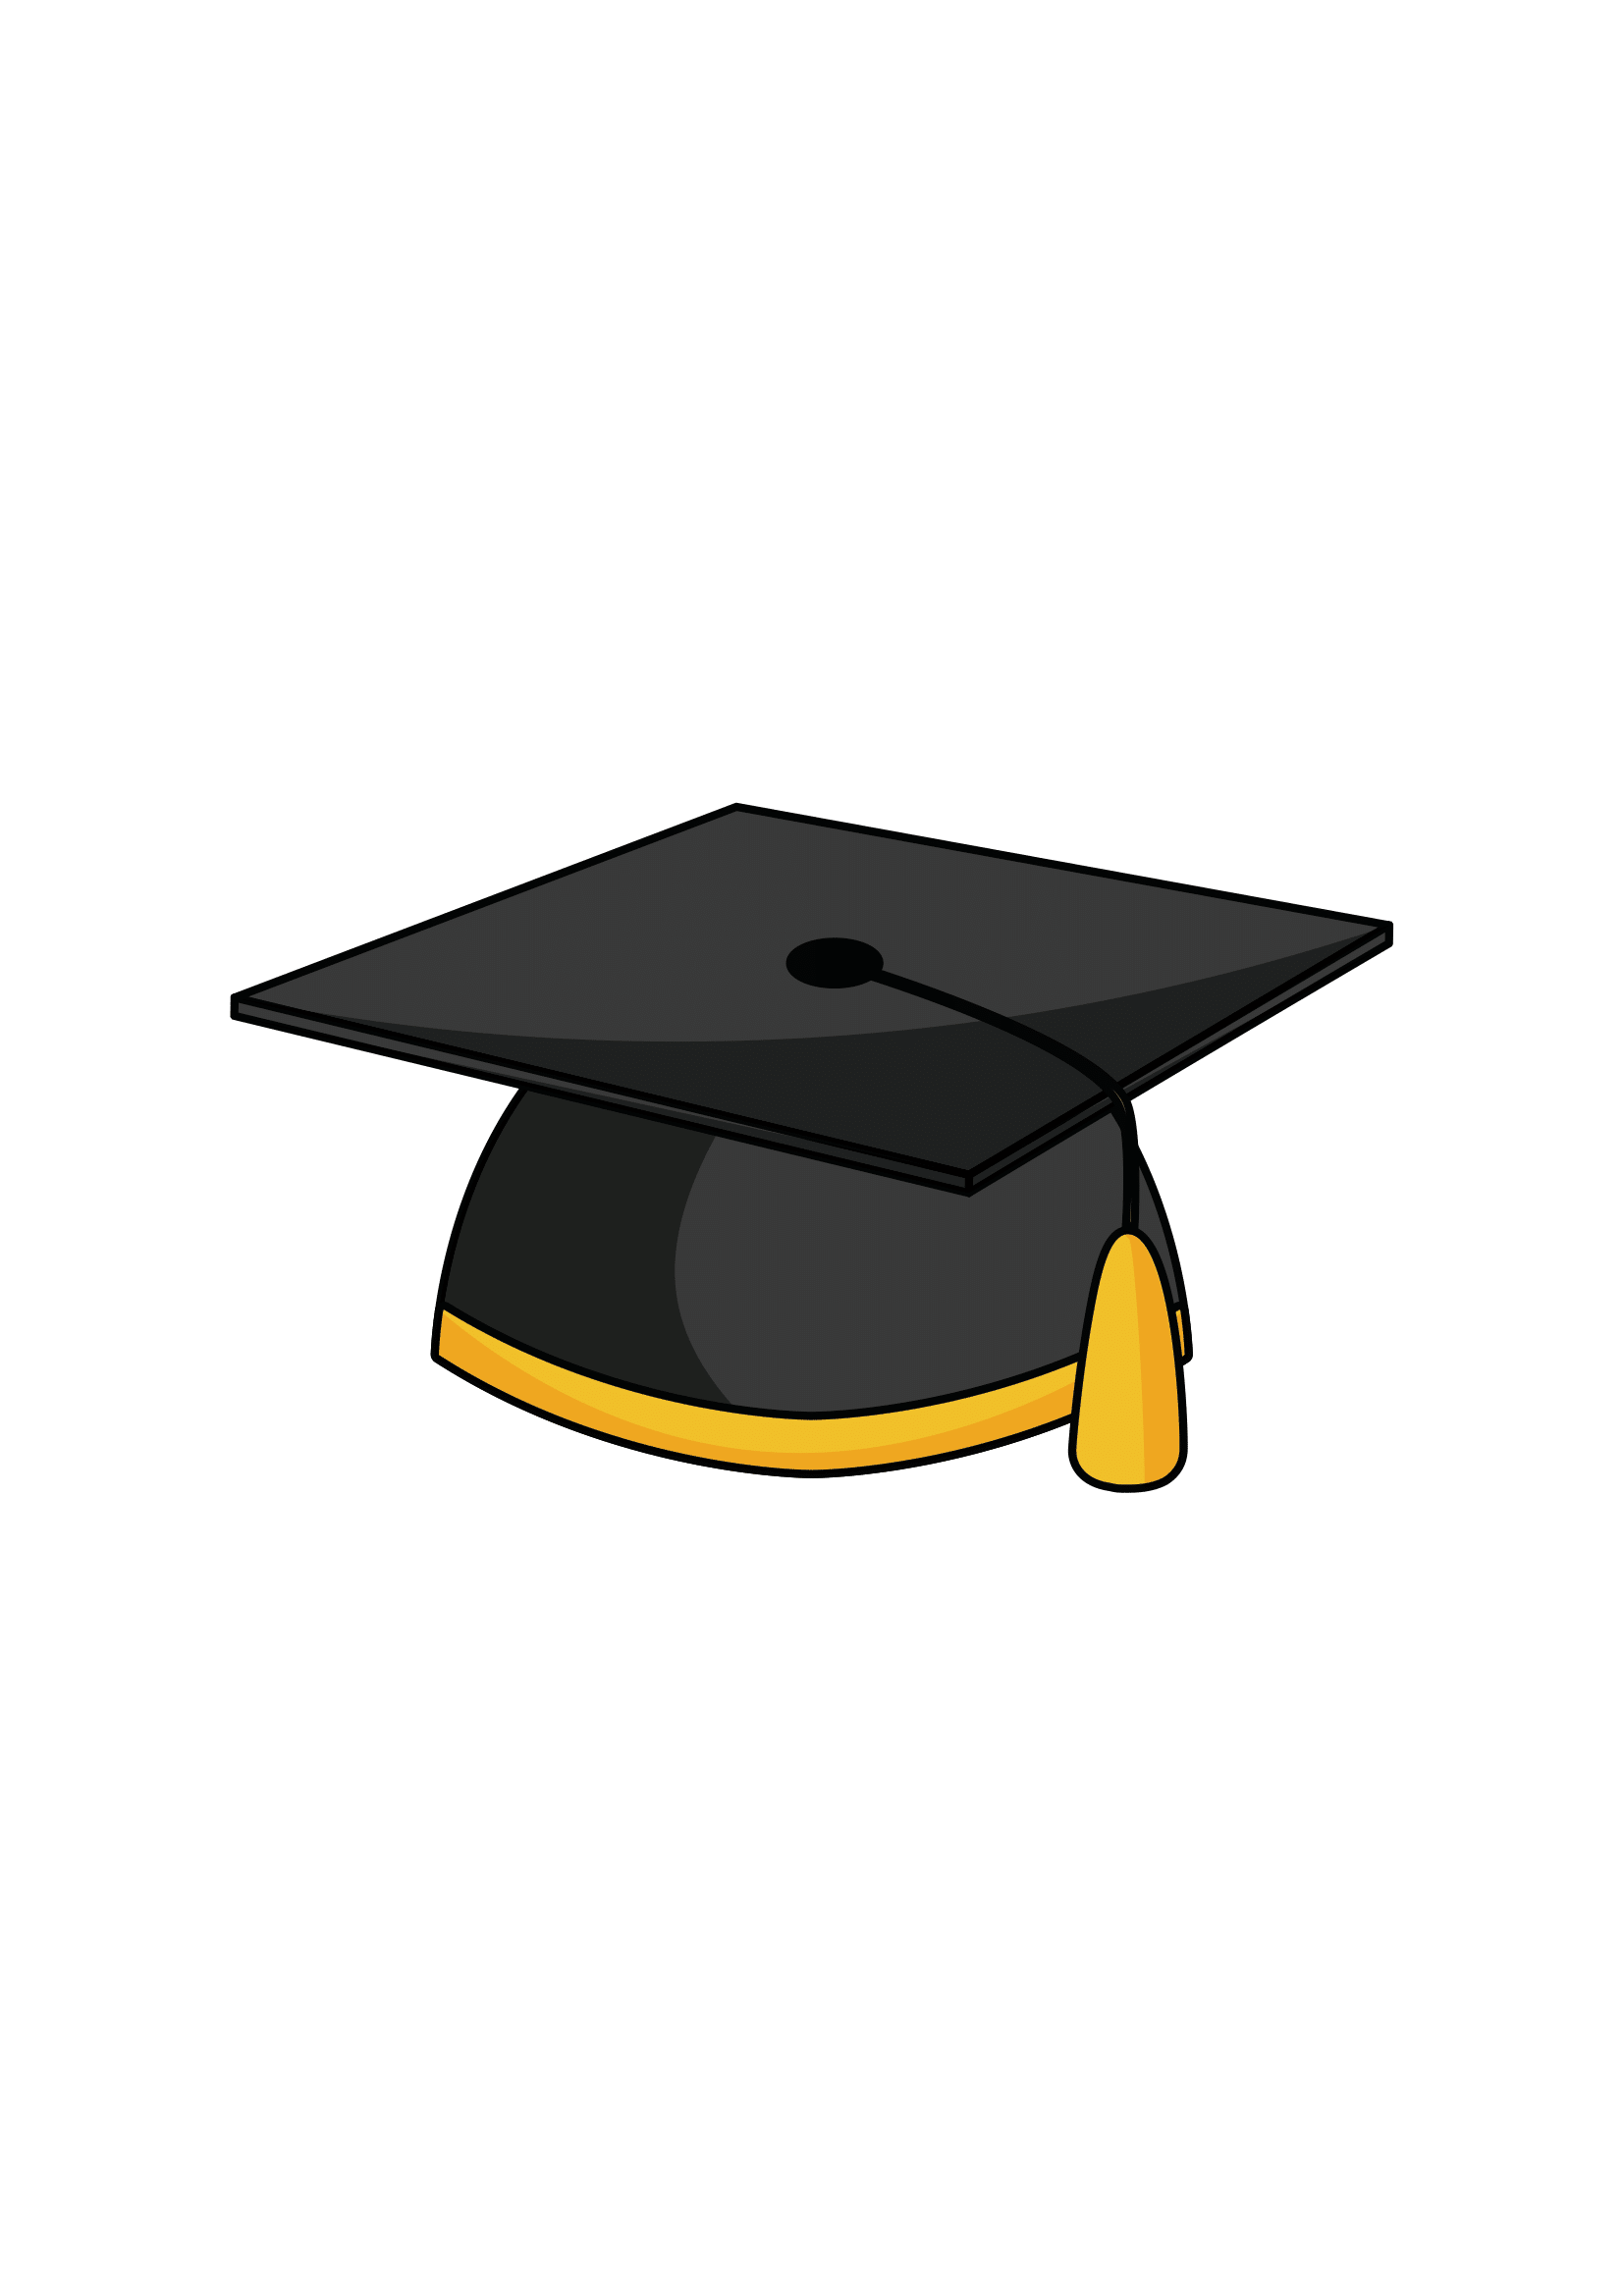 How to Draw A Graduation Cap Step by Step Printable